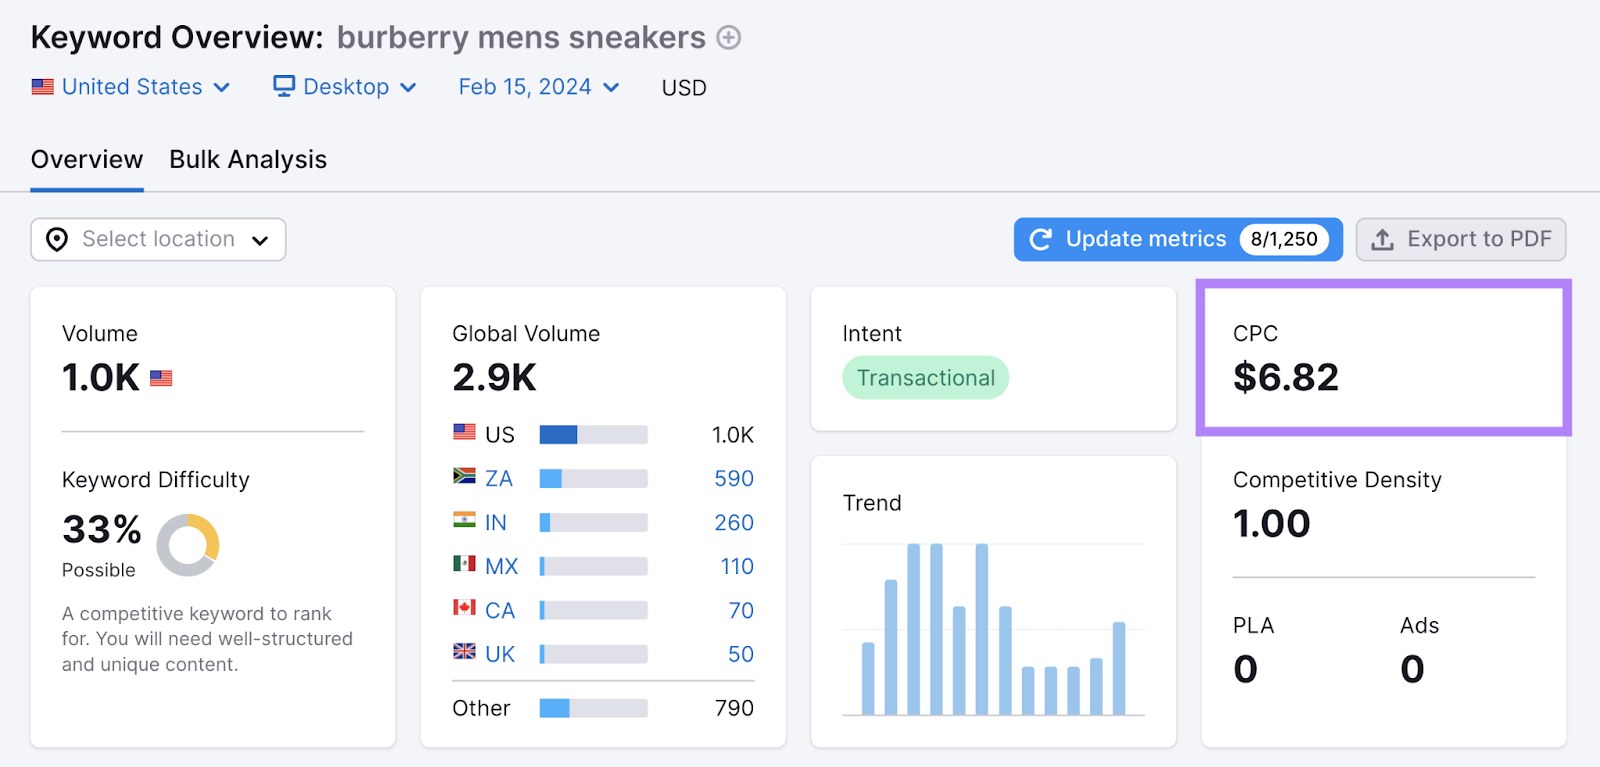 CPC for “burberry mens sneakers” is $6.82, shown successful  Keyword Overview tool